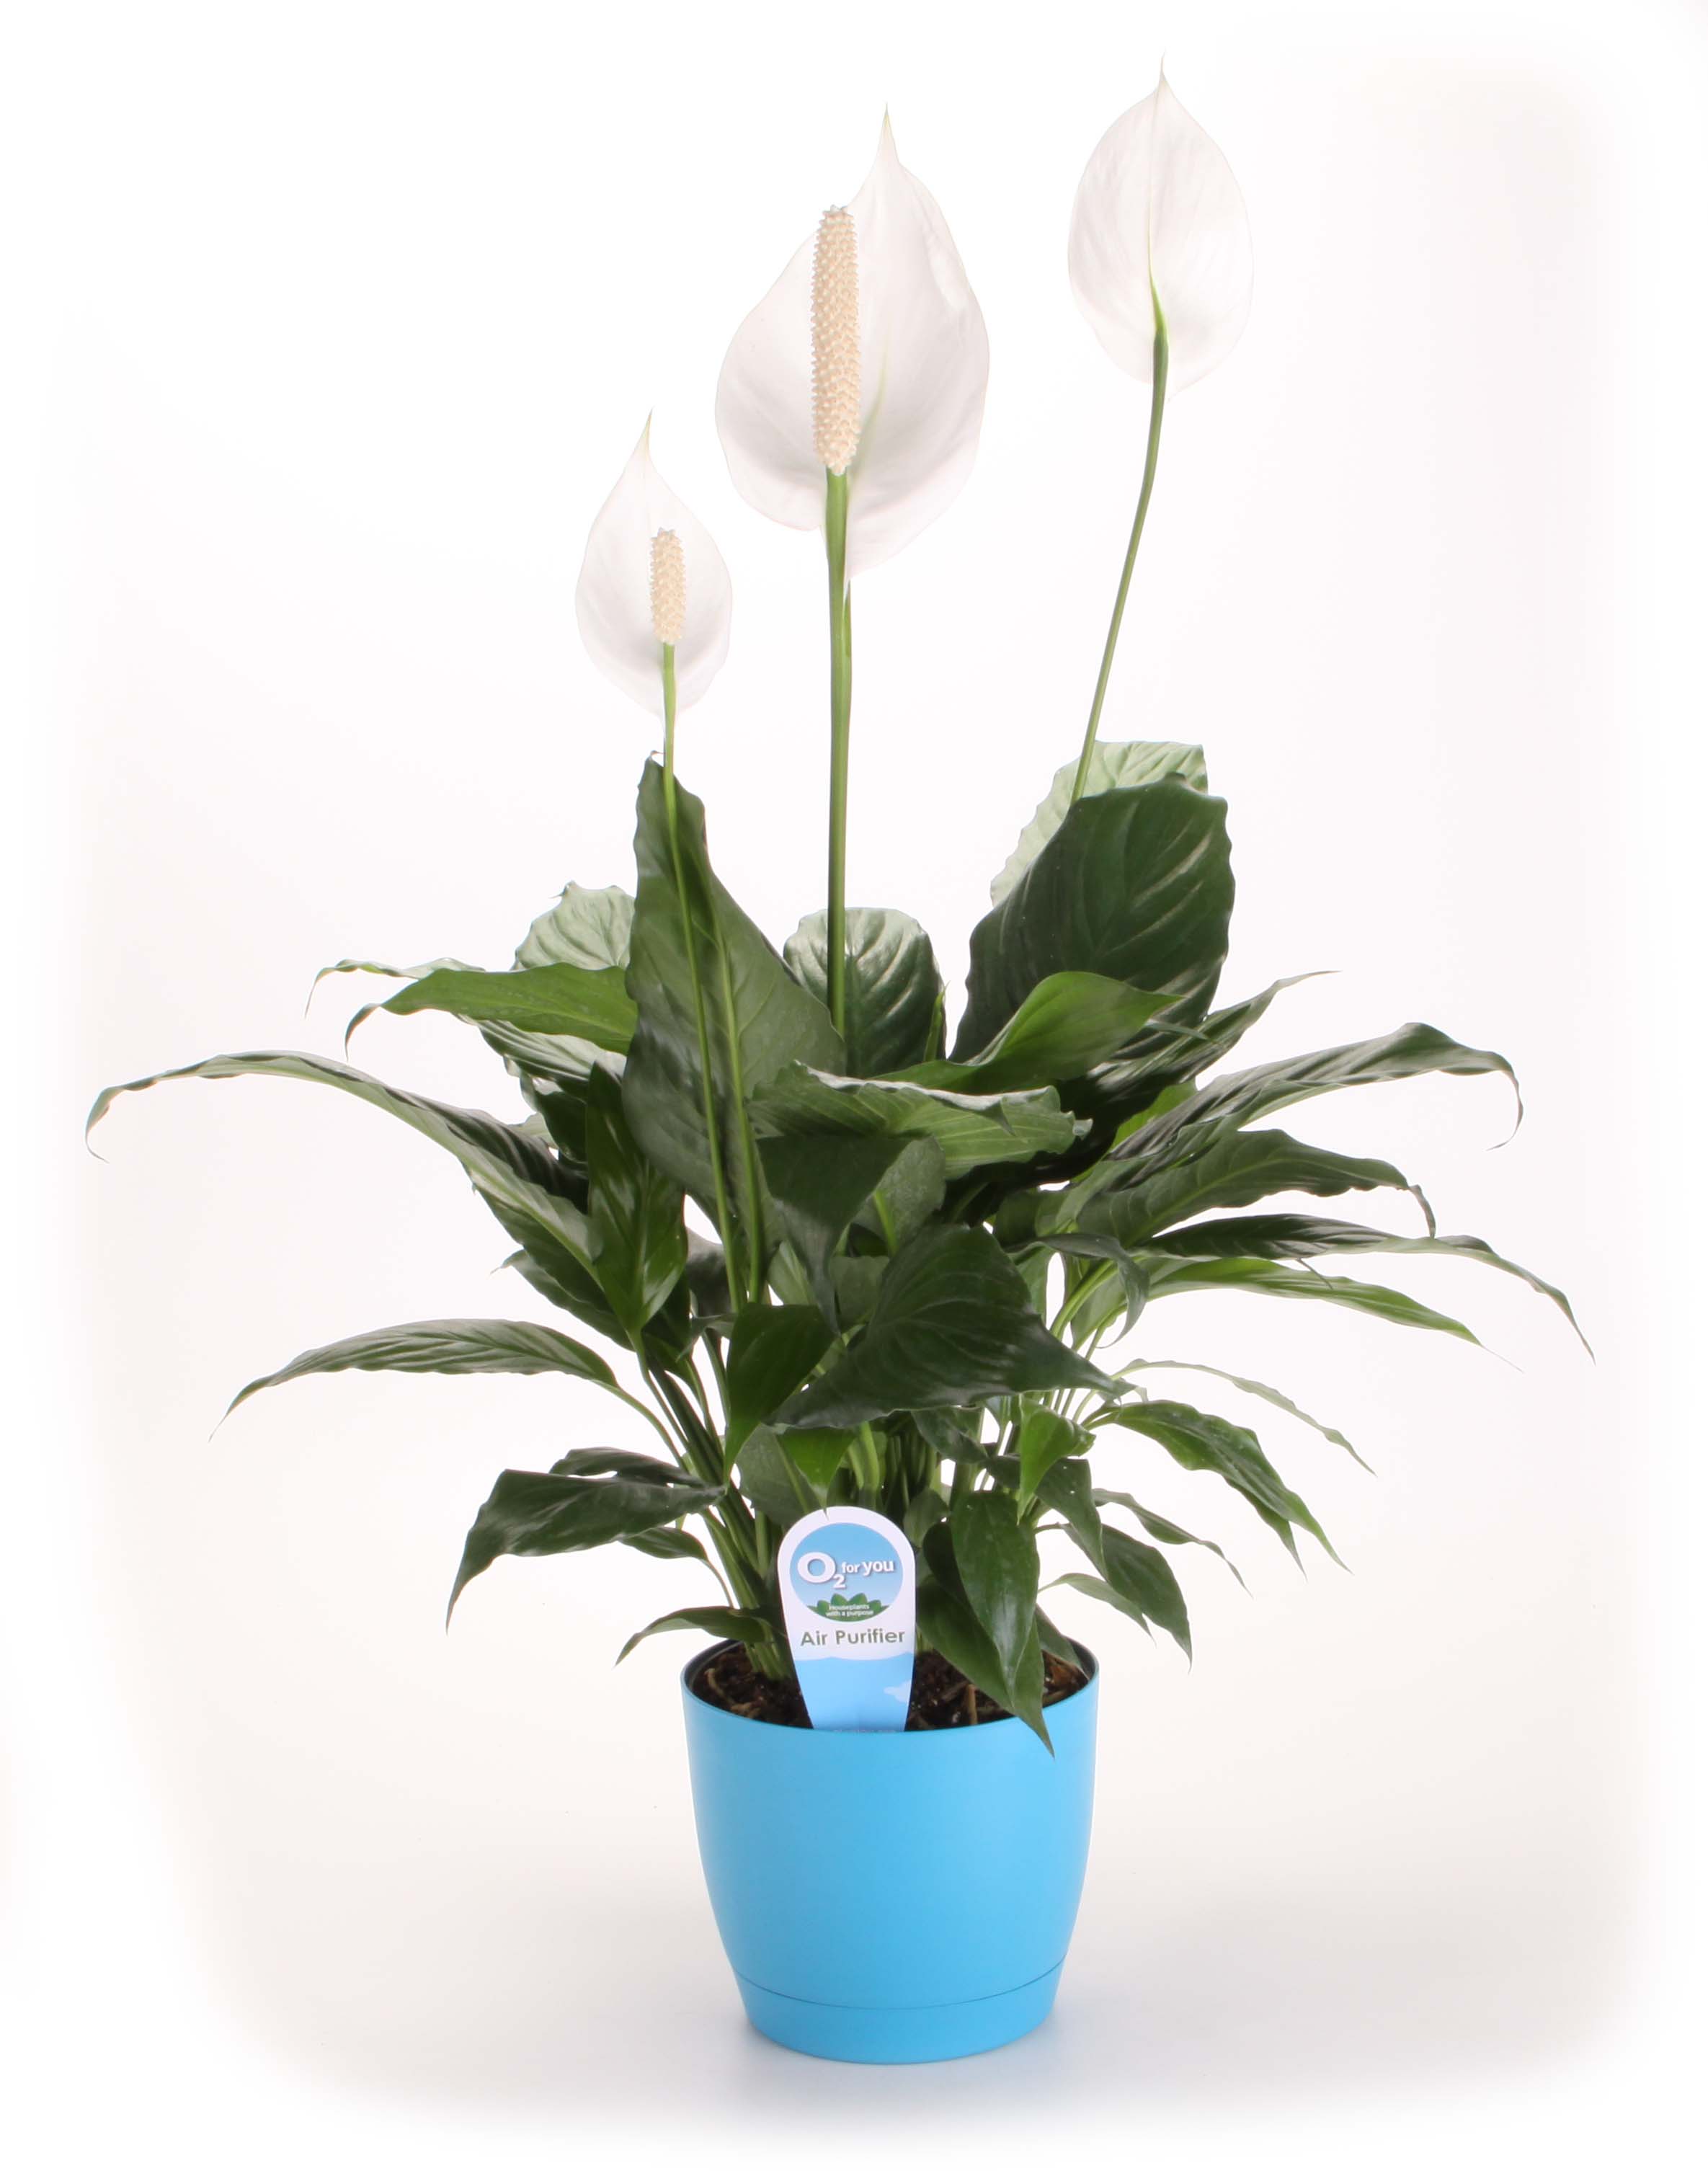 A peace lily in the workspace increases productivity and decreases stress